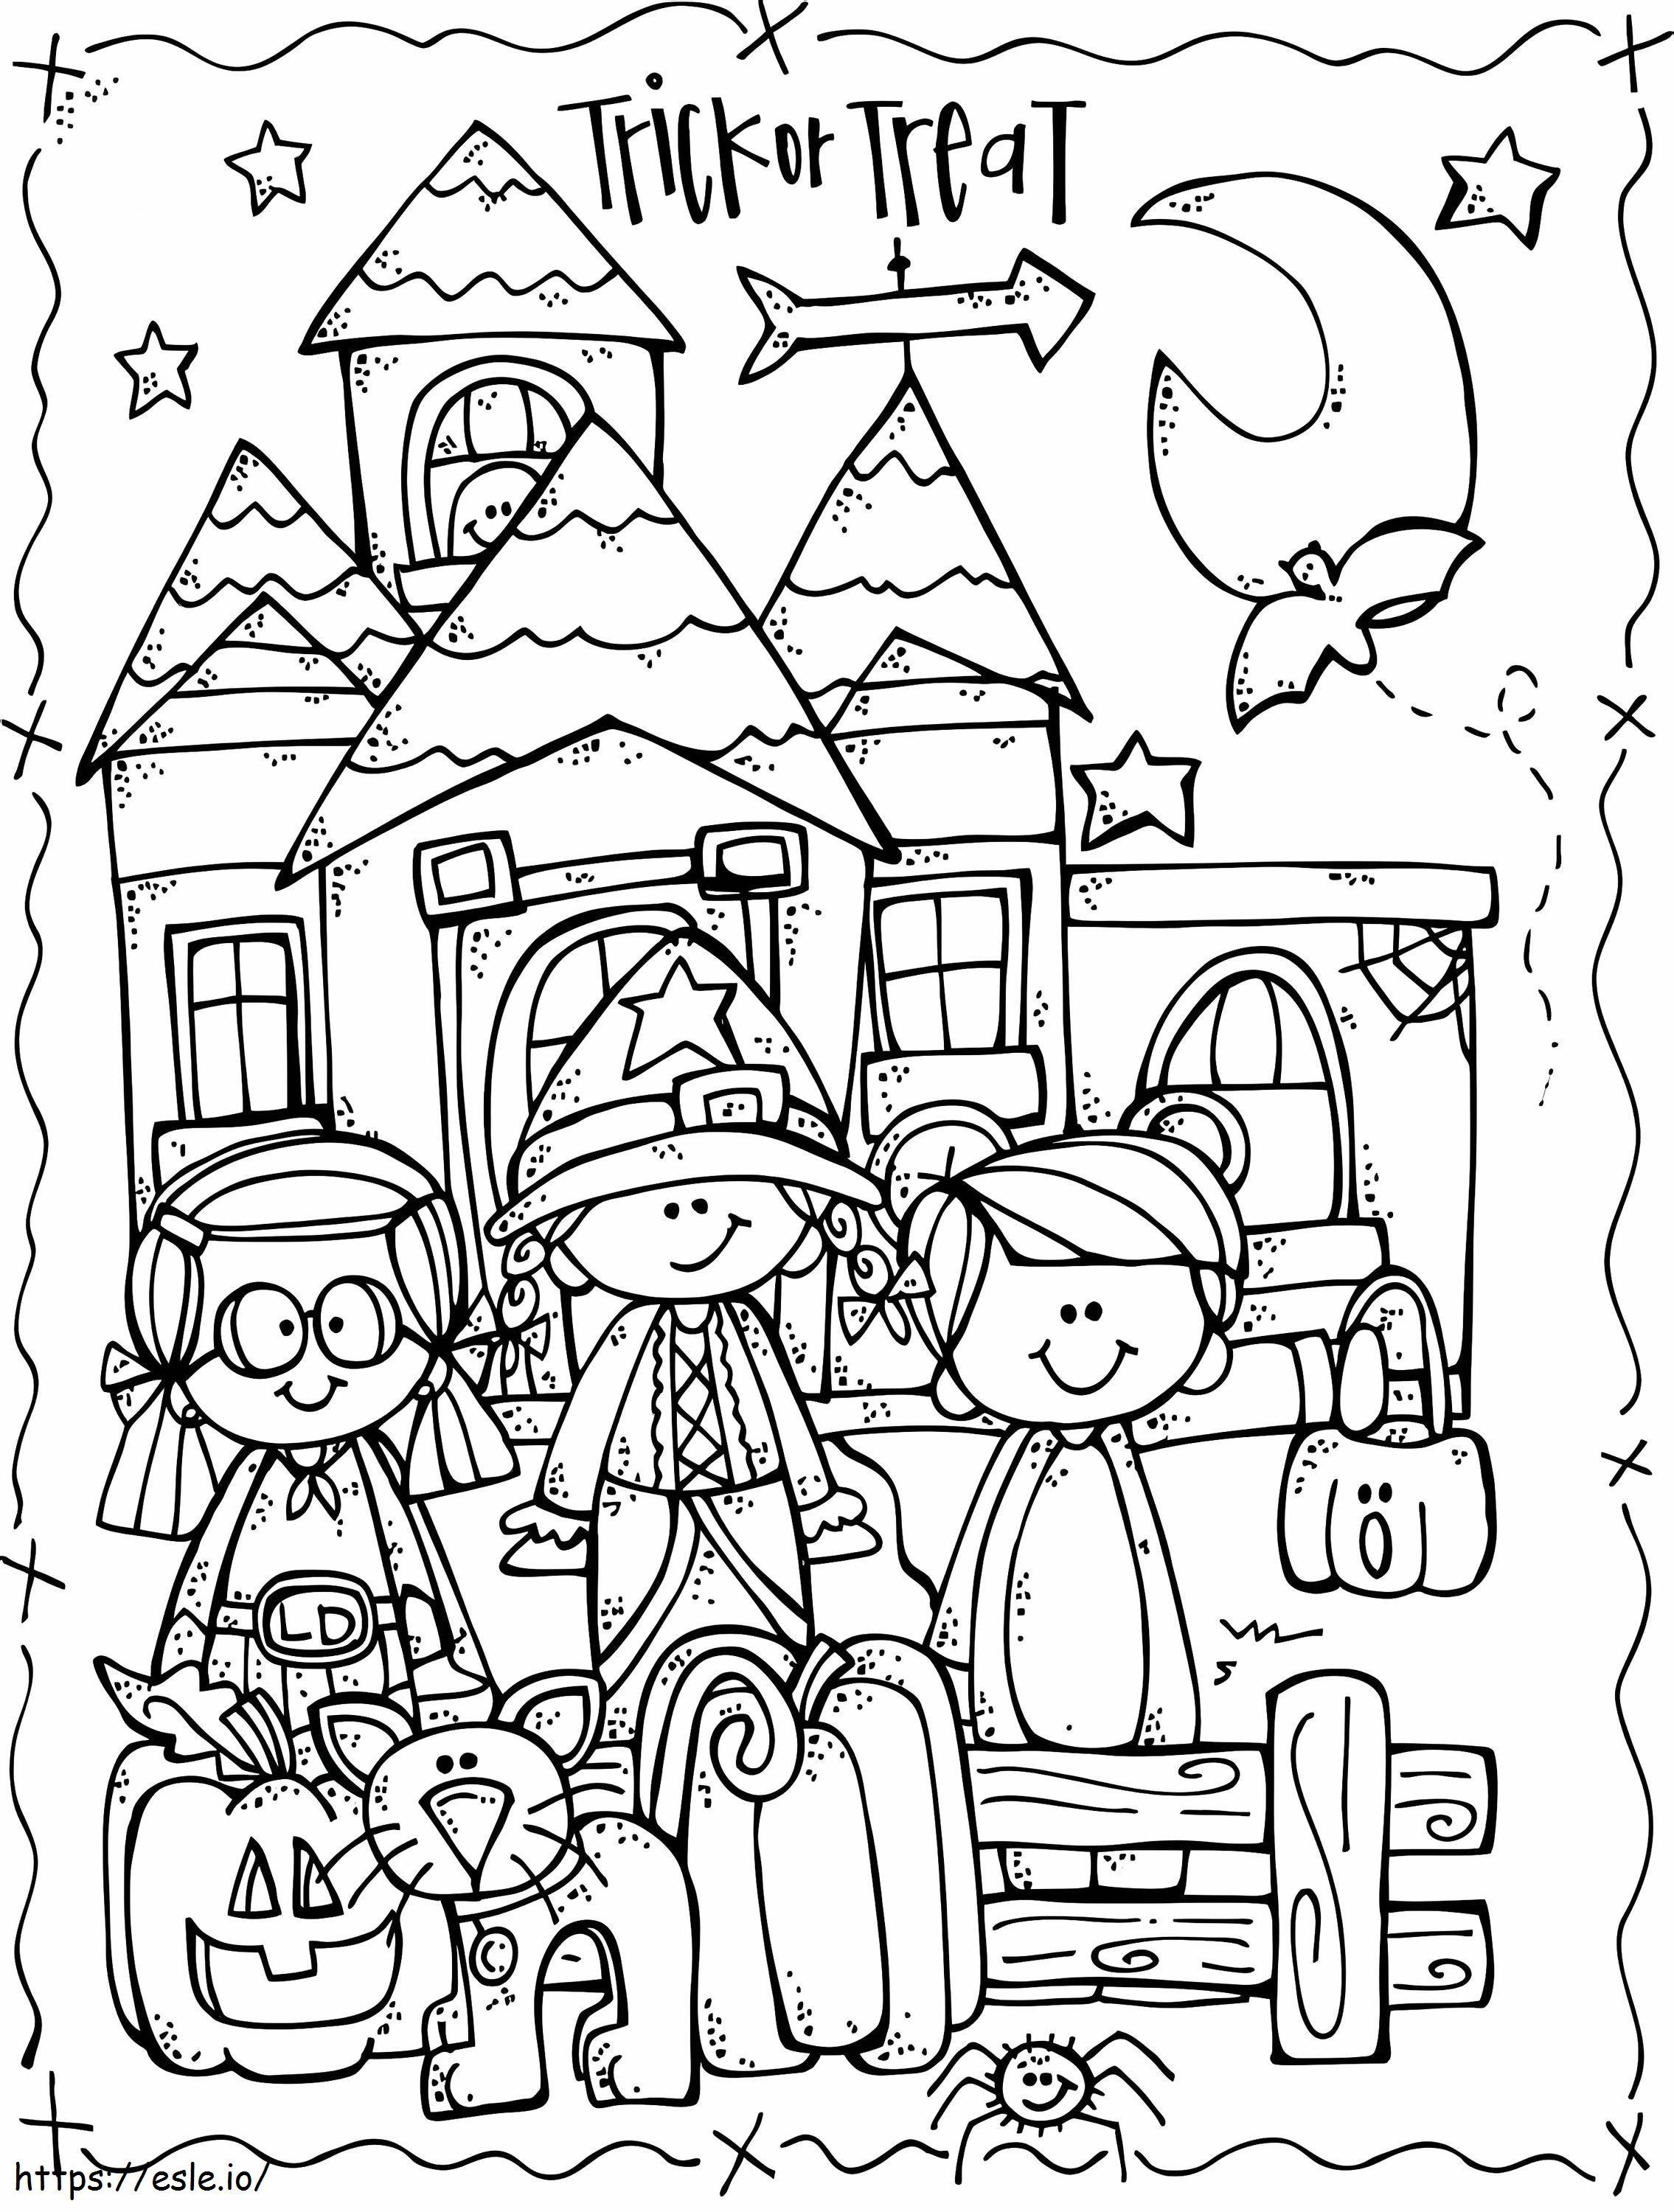 Trick Or Treat Melonheadz coloring page